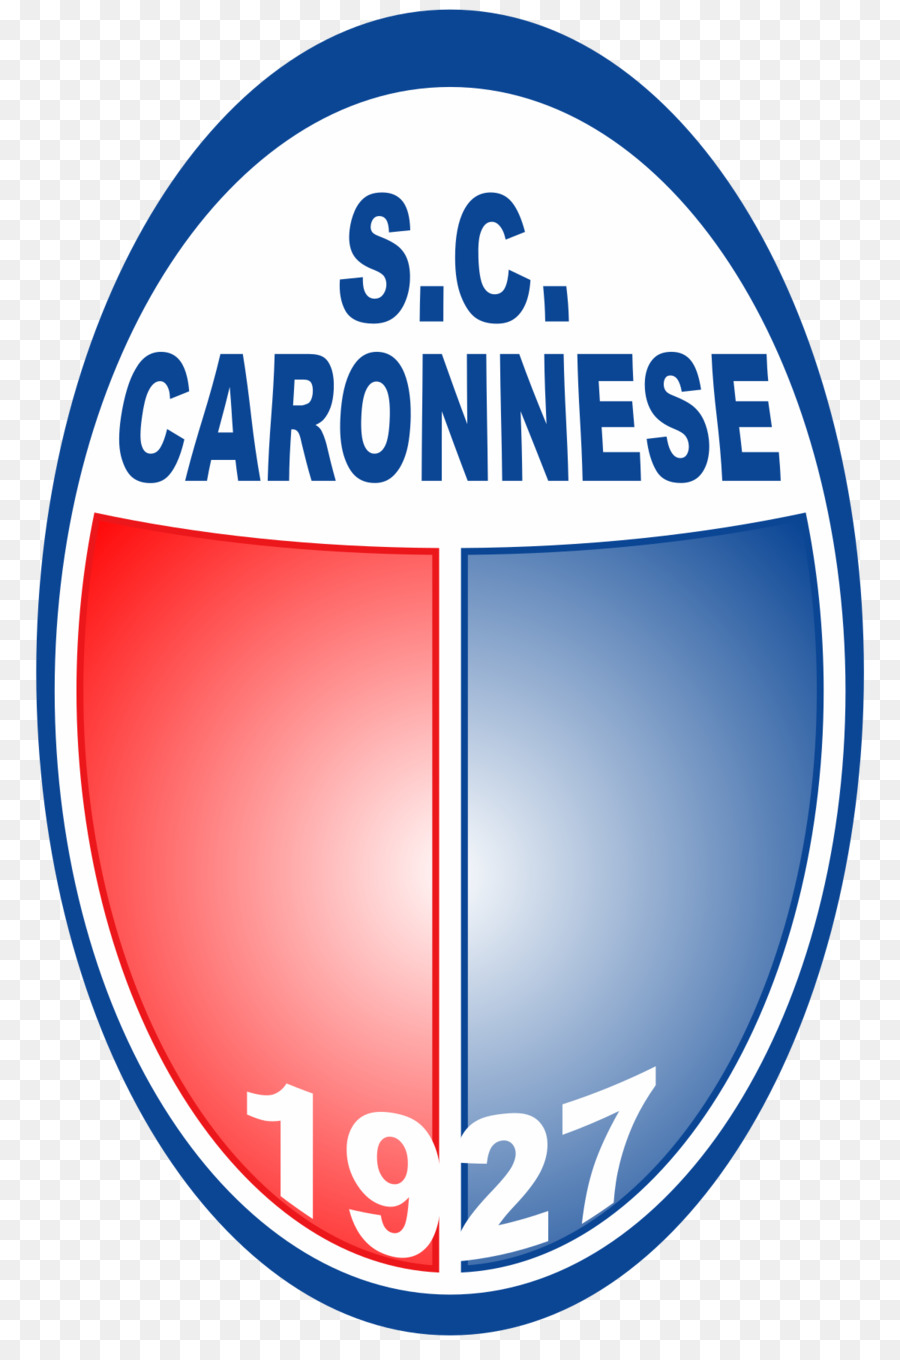 S. C. Caronnese S. S. D. C. Caronnese S. A. D. Ghi F. C. D. Thể Thao Bellinzago Turate - 